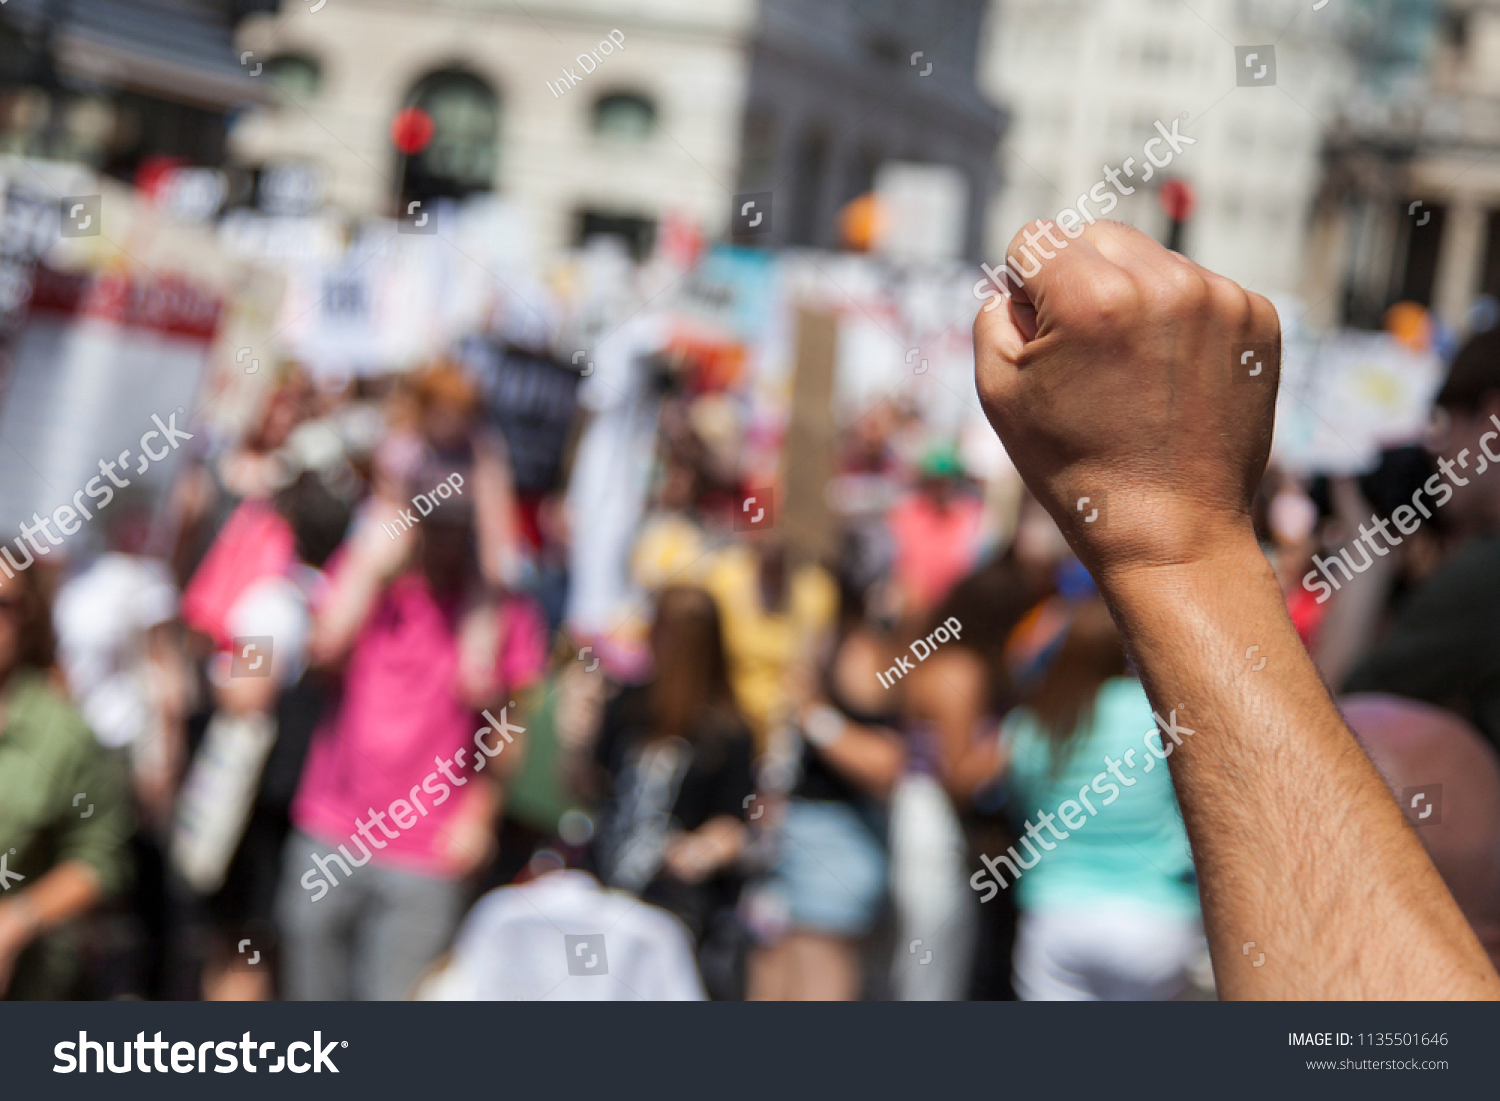 A raised fist of a protestor at a political demonstration #1135501646